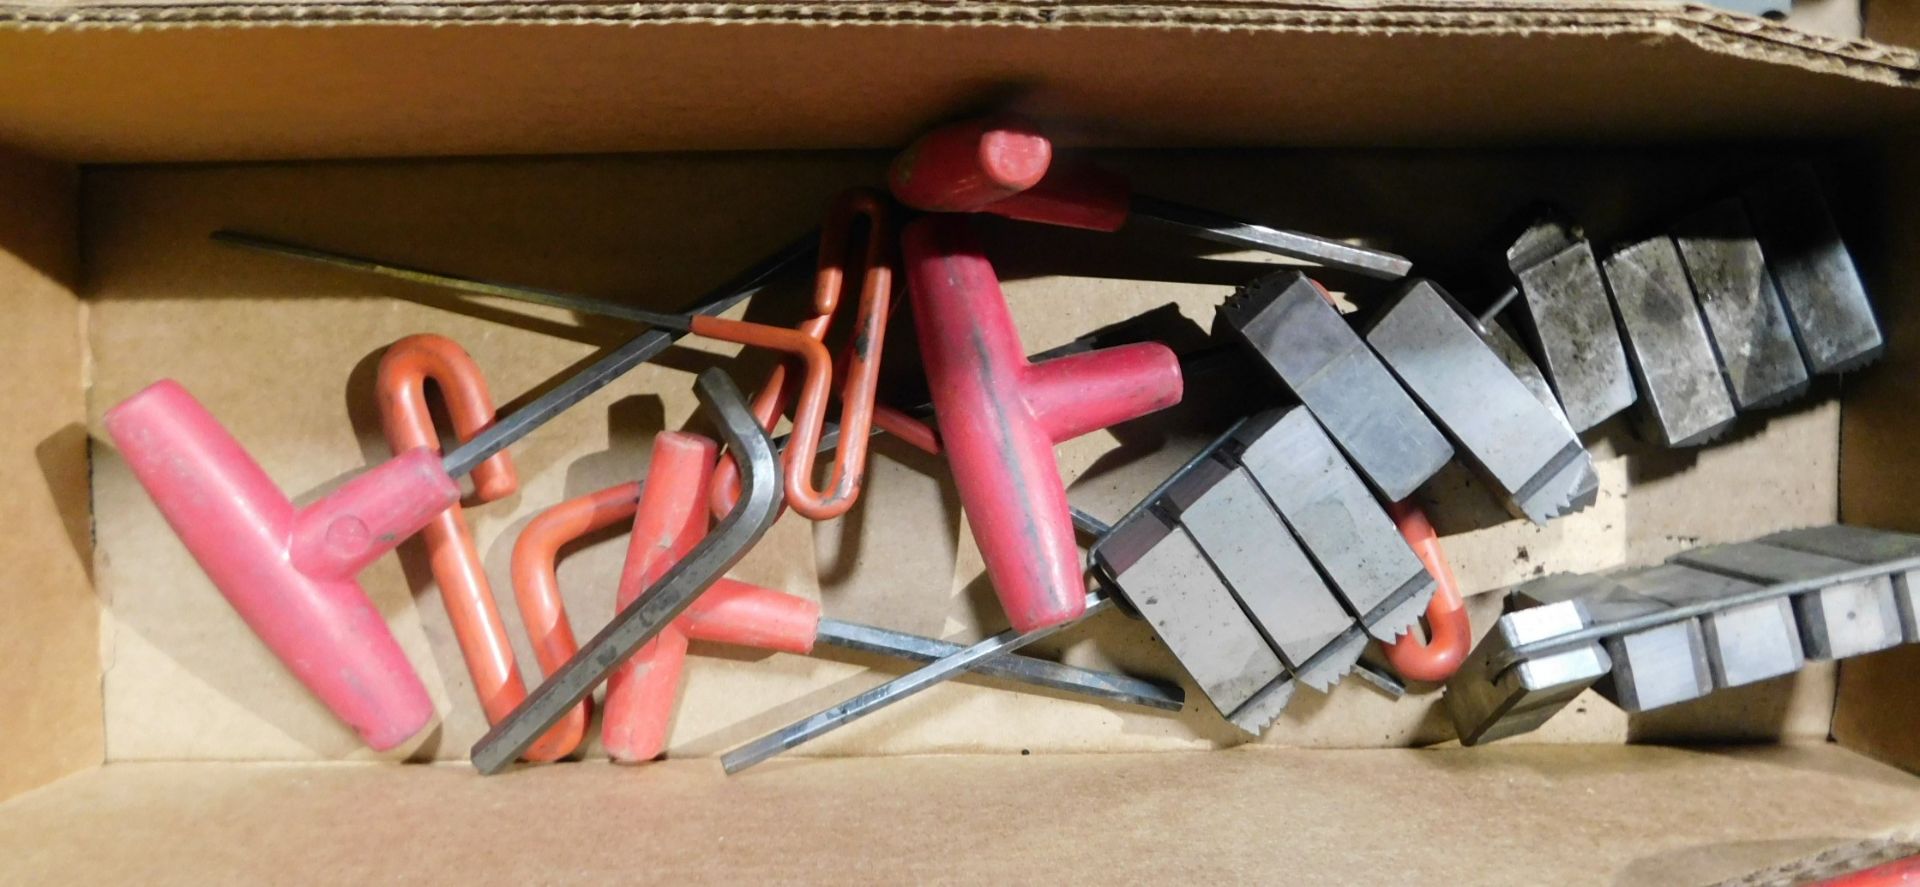 T-Handle Hex Wrenches and Thread Chasers